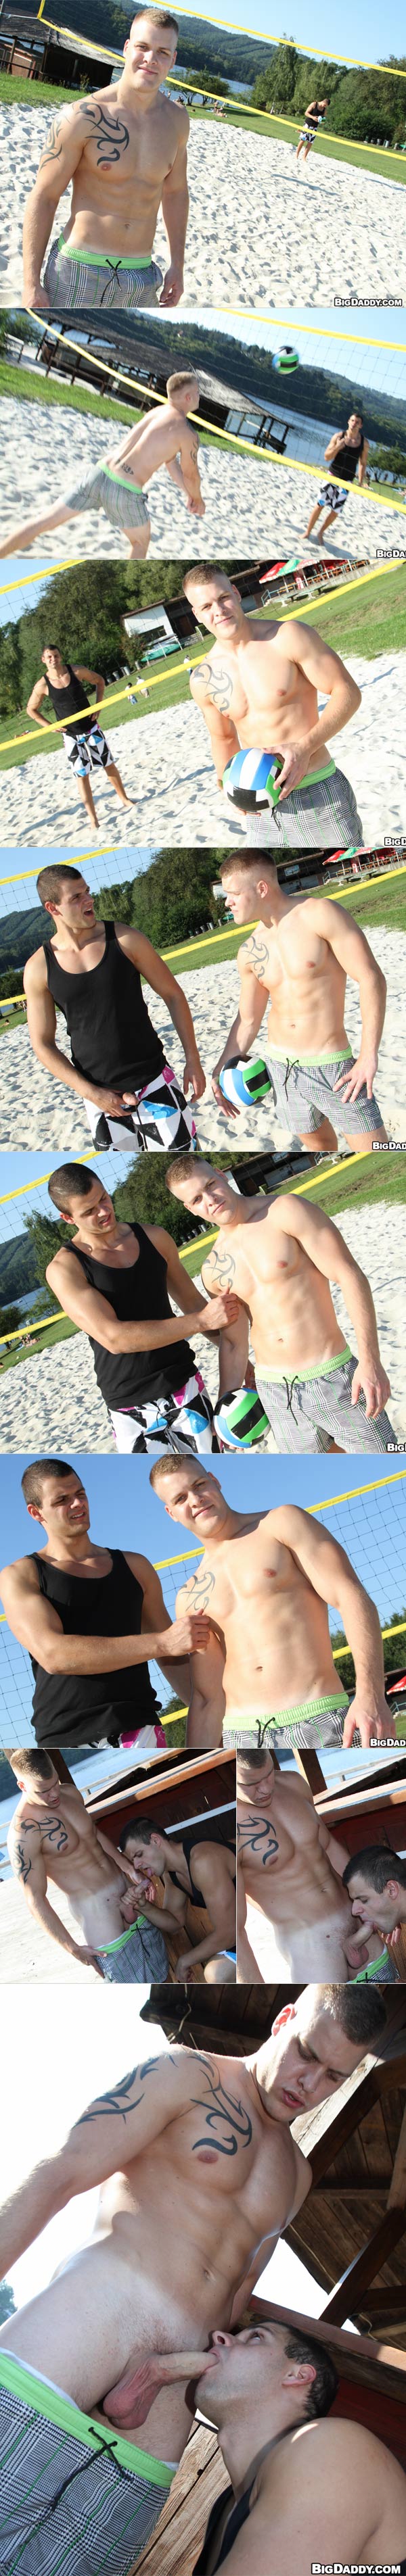 Volley-Ball & Some Dick! (Paul Fresh & Mark) (Bareback) at OutInPublic